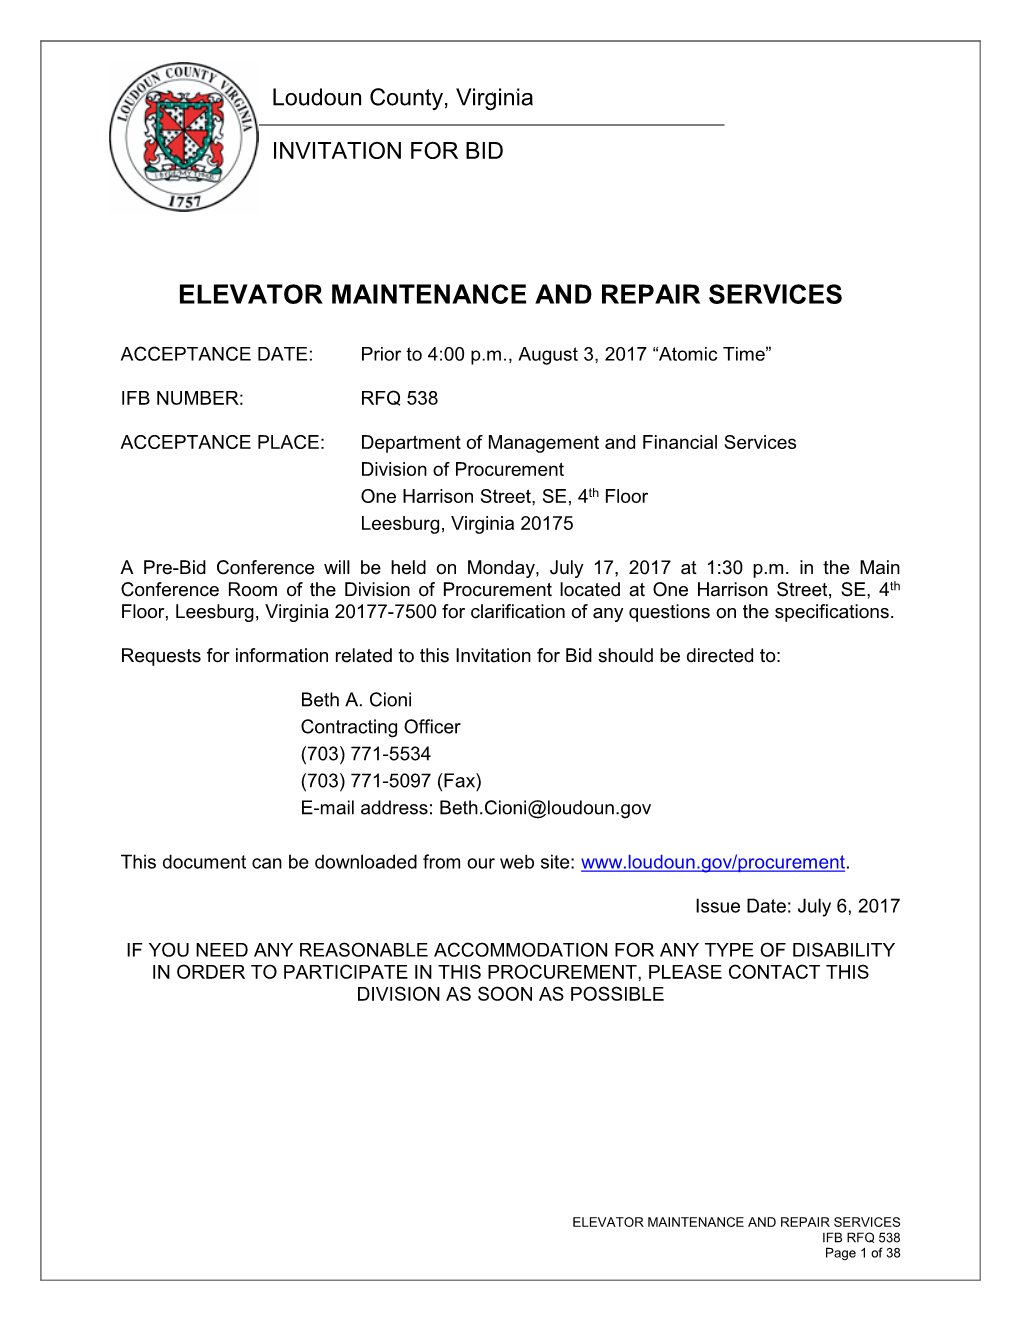 Elevator Maintenance and Repair Services